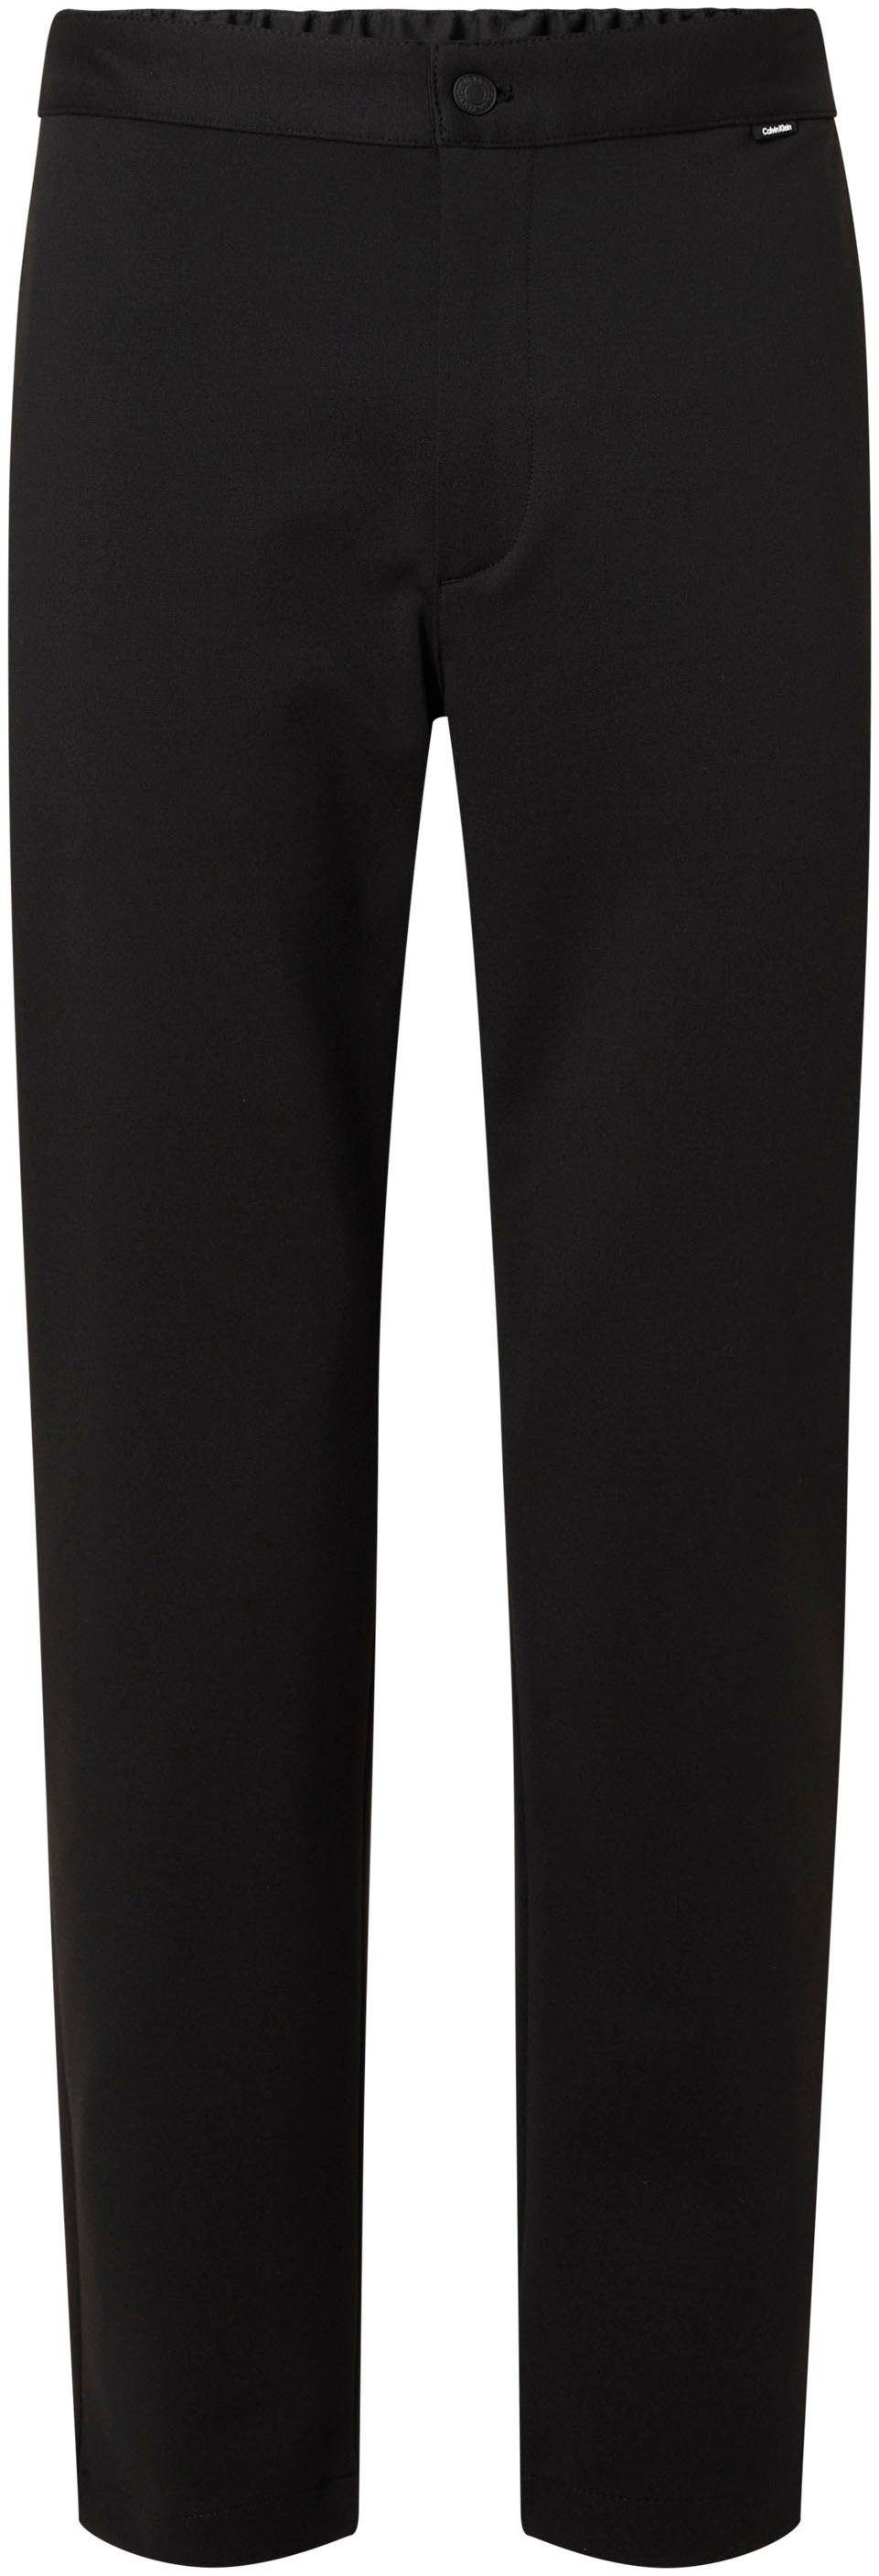 PANT KNIT COMFORT Calvin Stretch-Hose TAPERED Klein